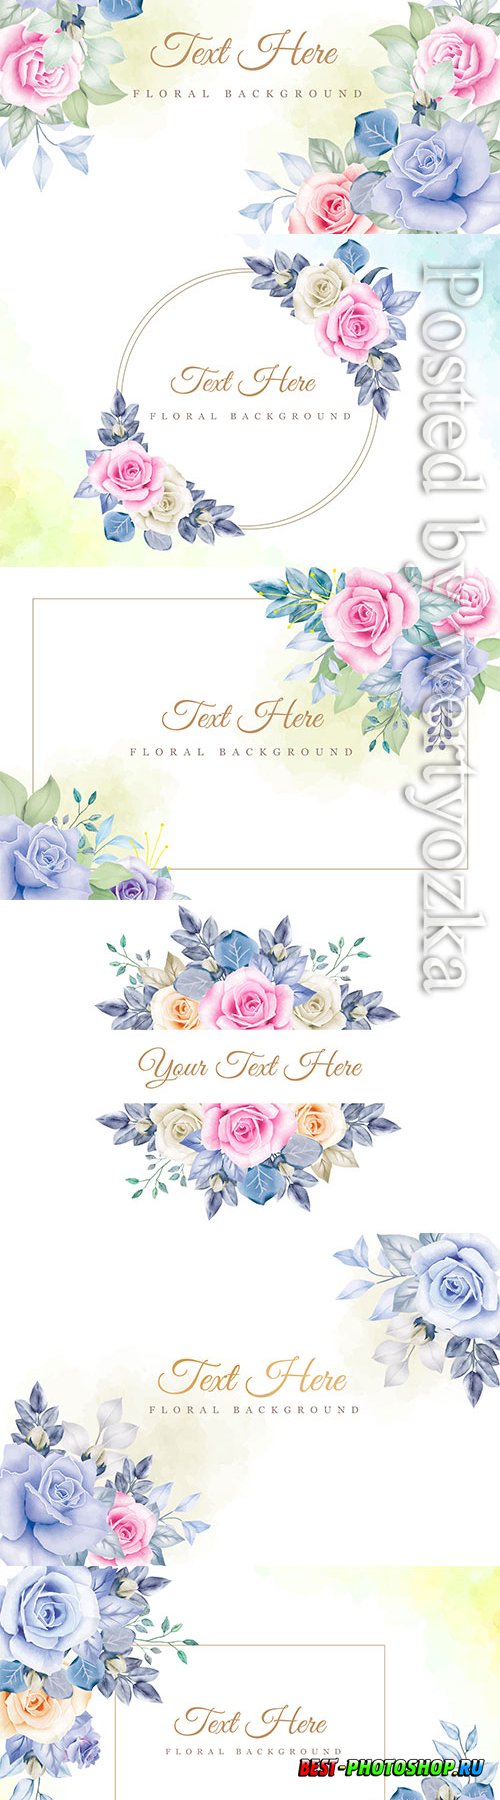 Elegant floral frame with beautiful floral watercolor